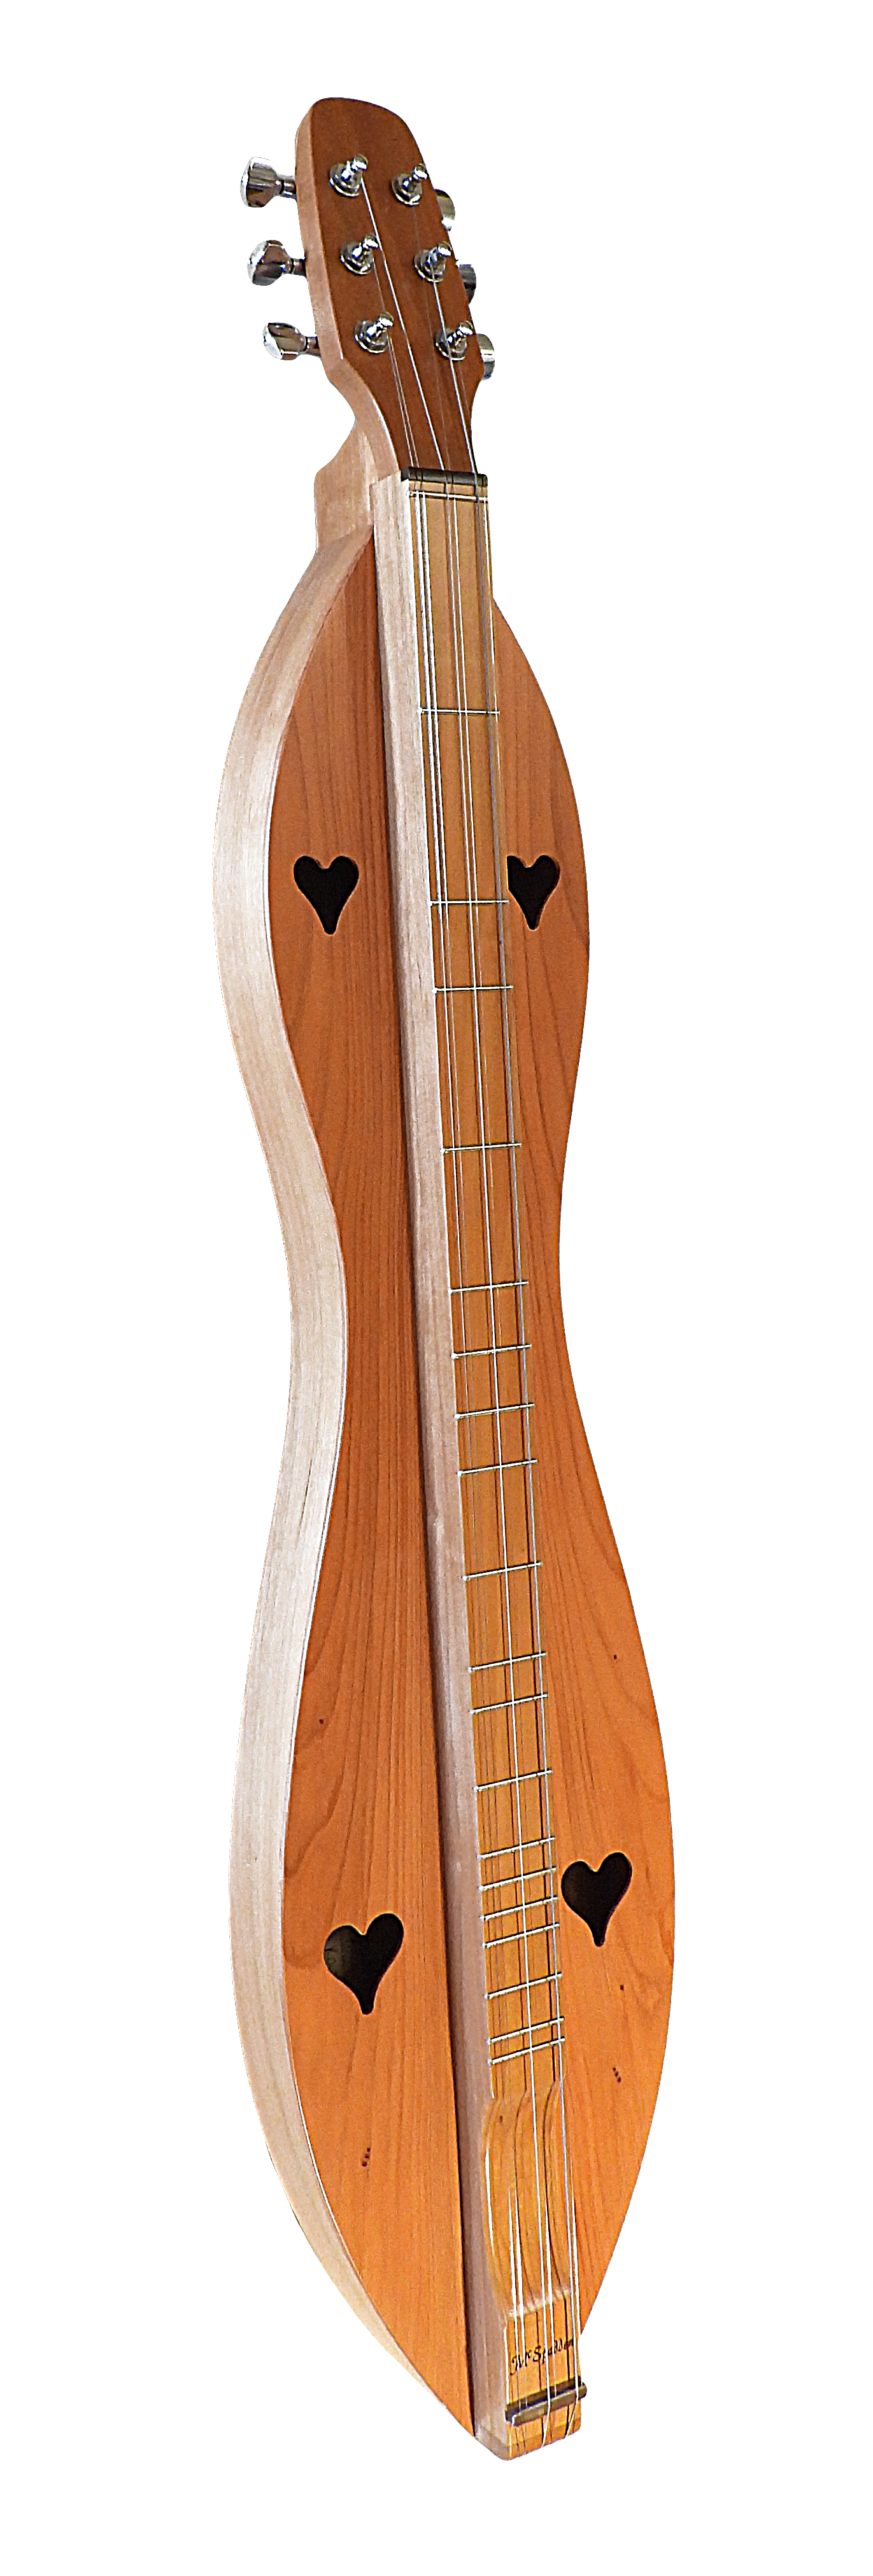 6 String Baritone, Flathead, Hourglass with Cherry back and sides, Redwood top (6FHCRB)